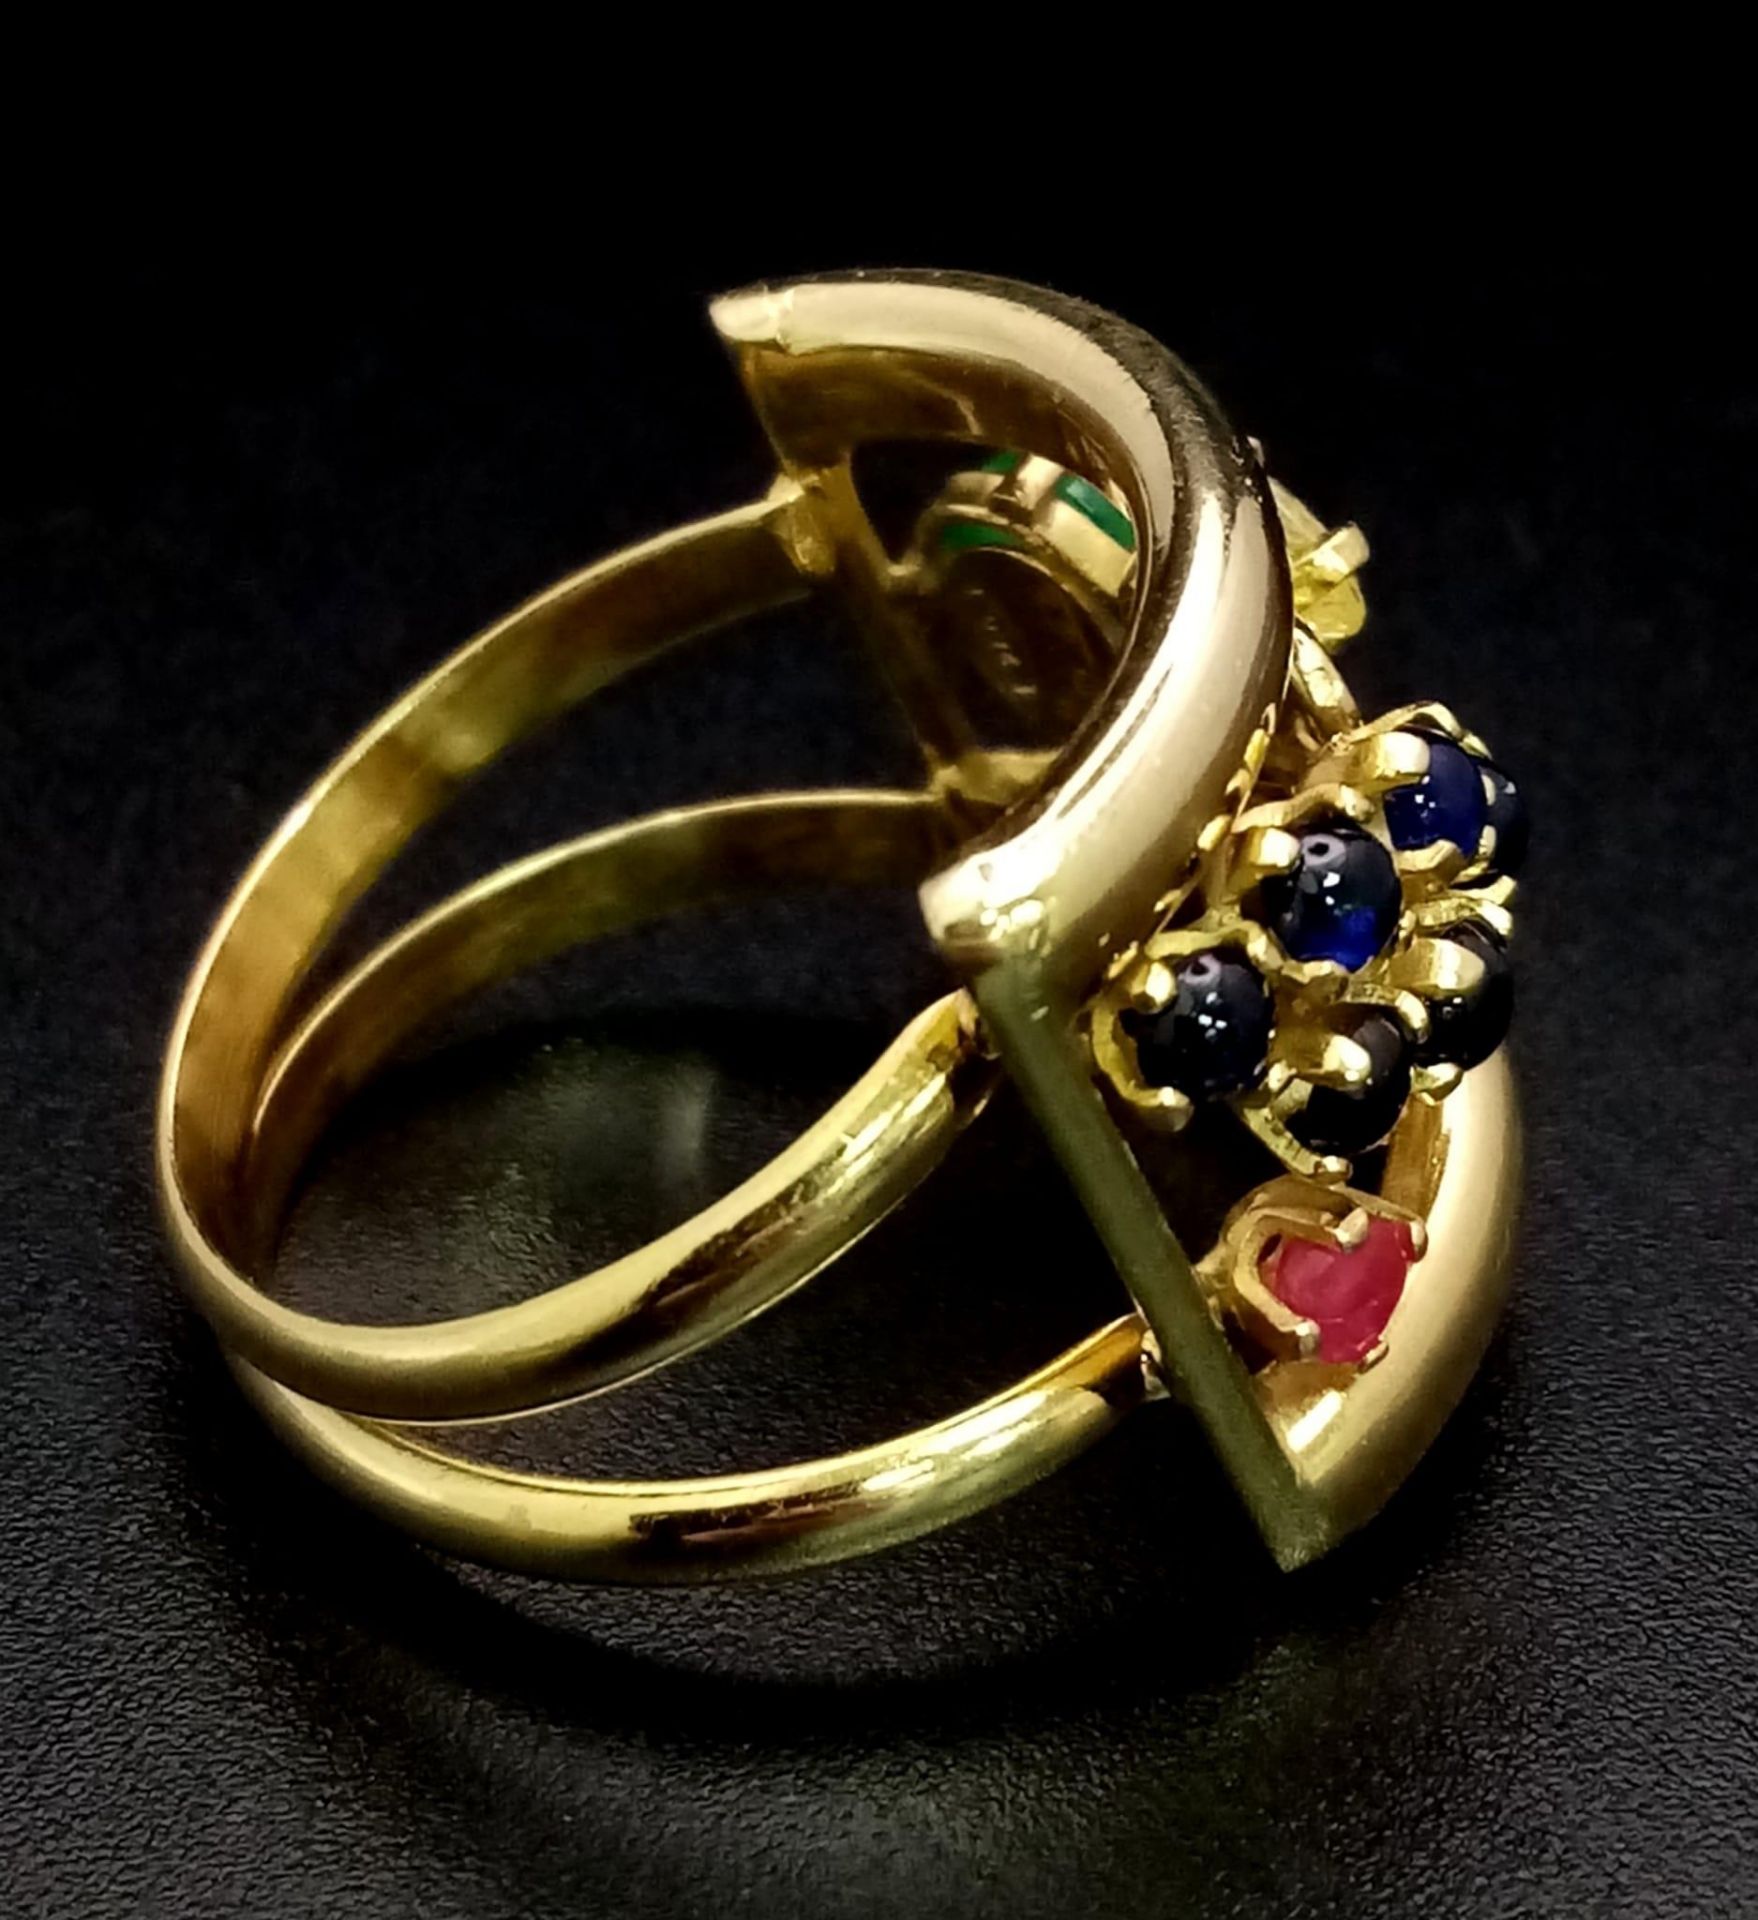 An 18 K yellow gold ring with an artistic design and adorned with an emerald cabochon, plus ruby, - Bild 5 aus 7